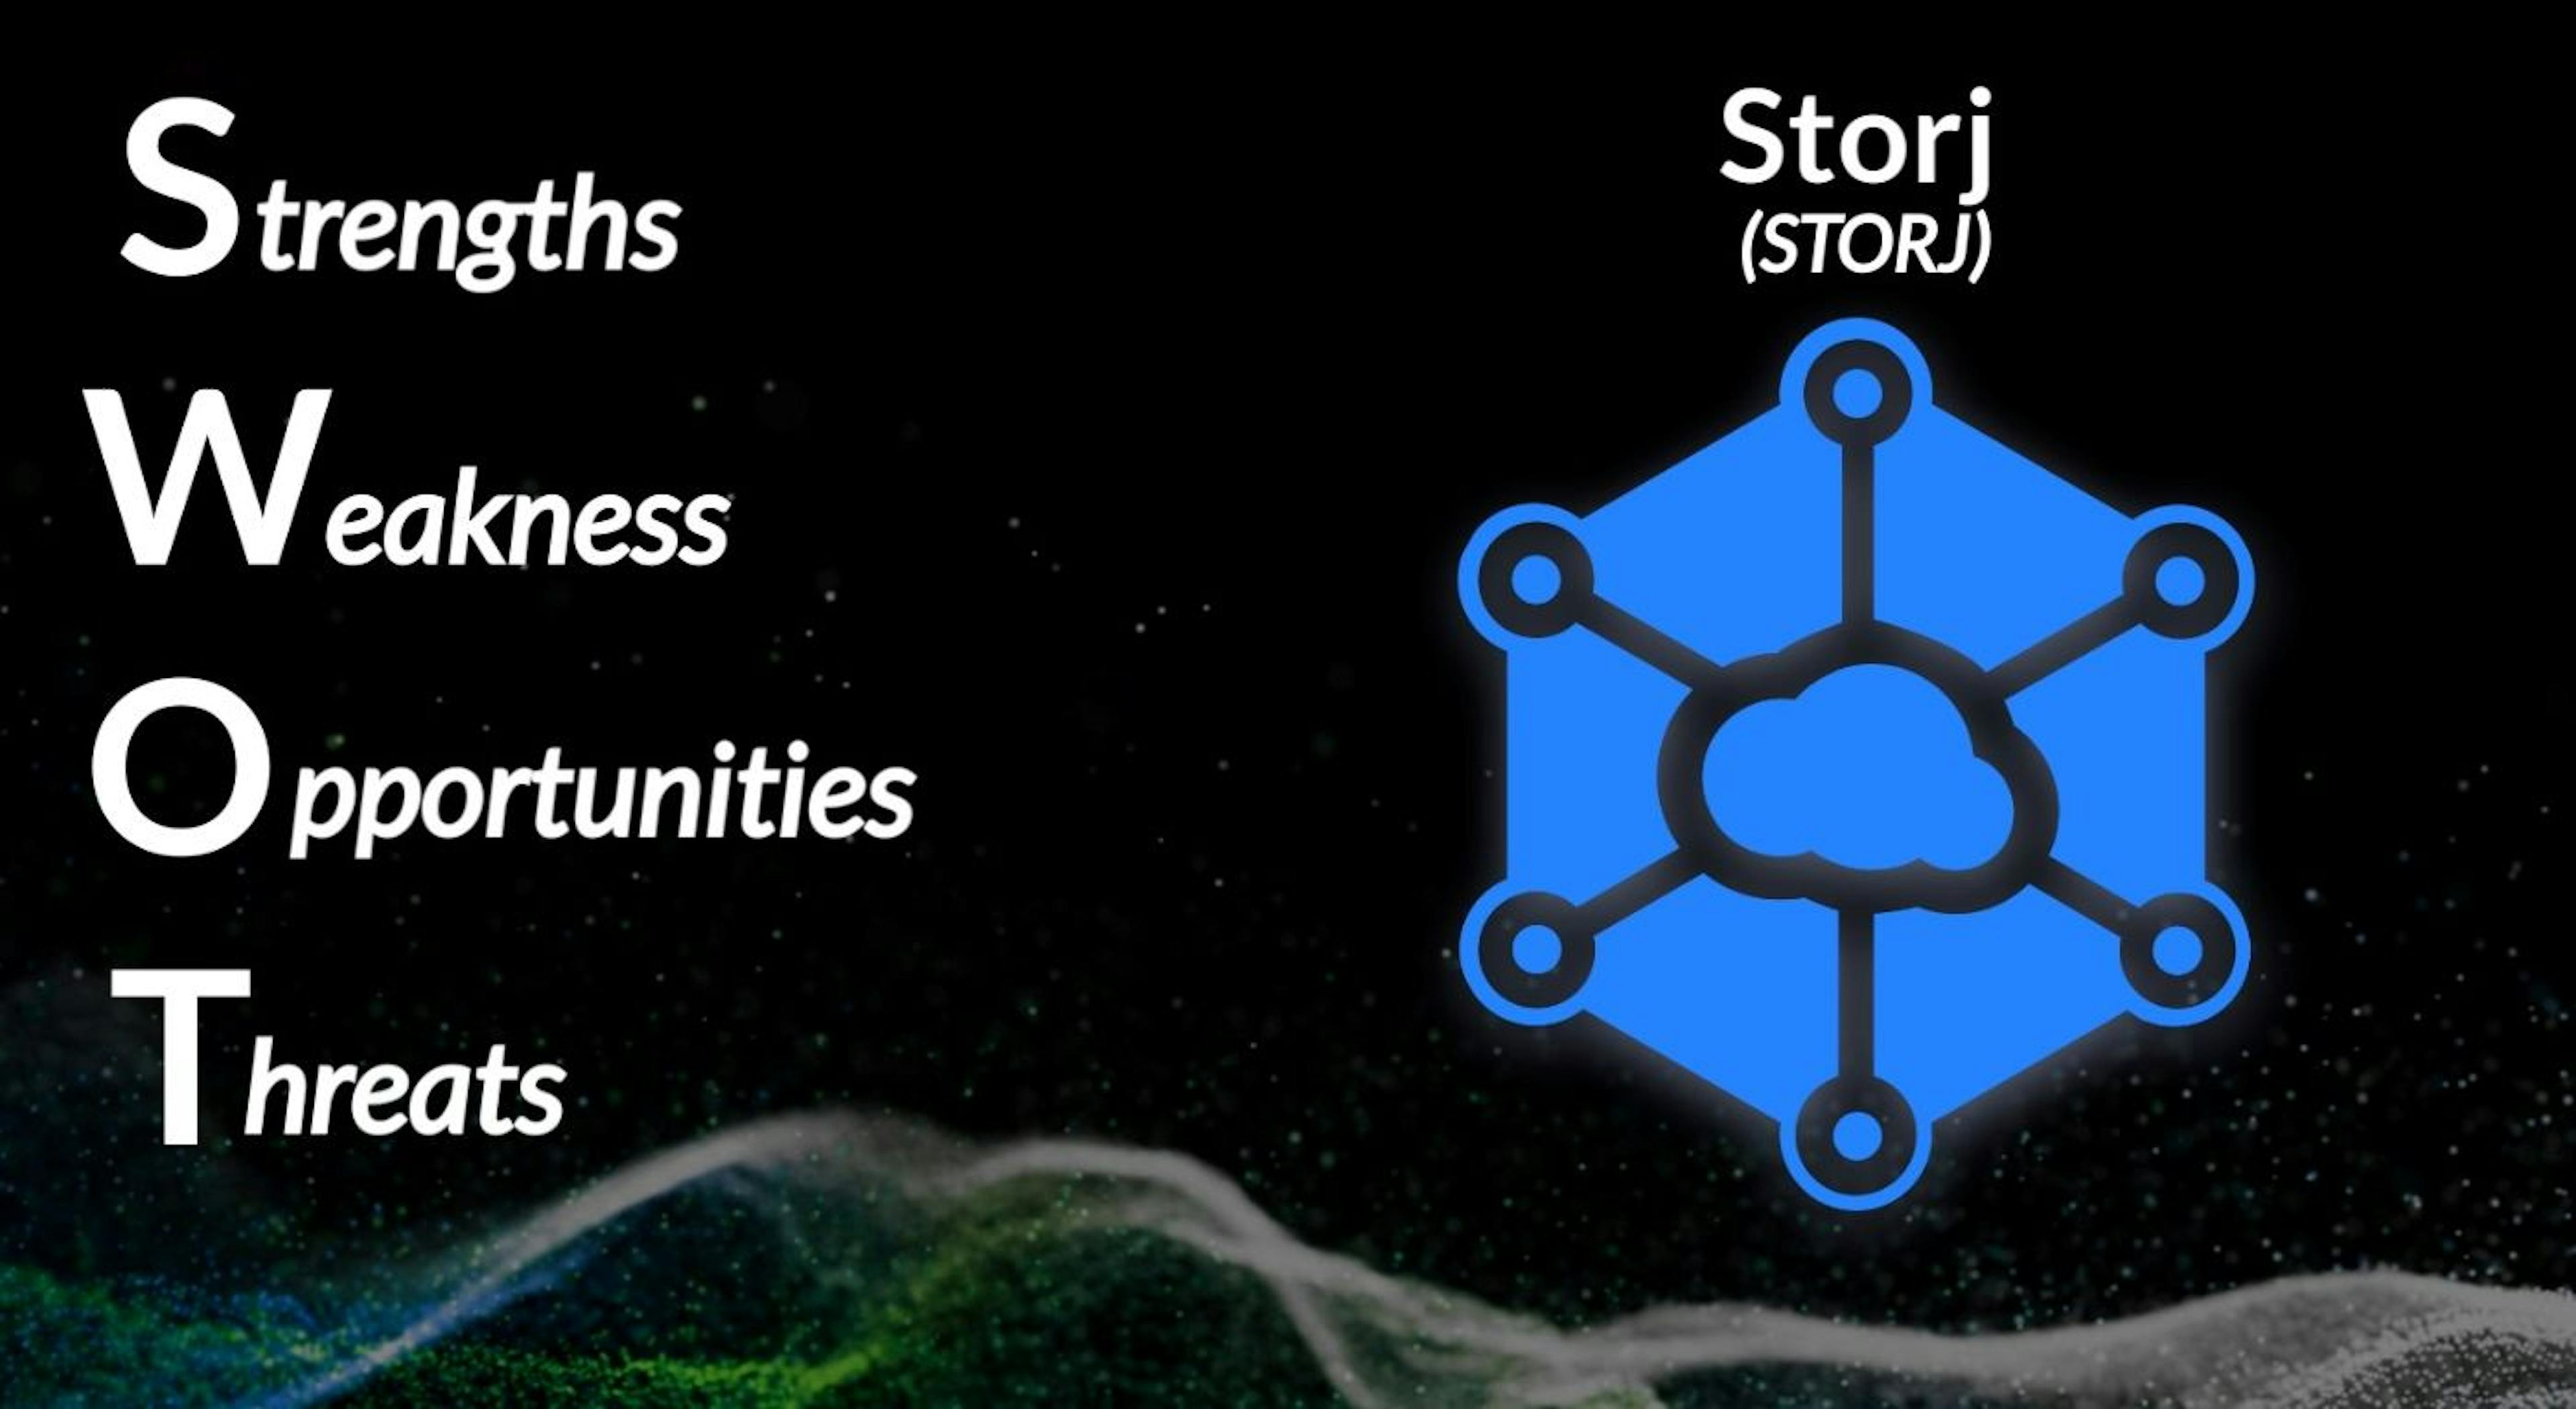 featured image - The Storj (STORJ) SWOT Analysis